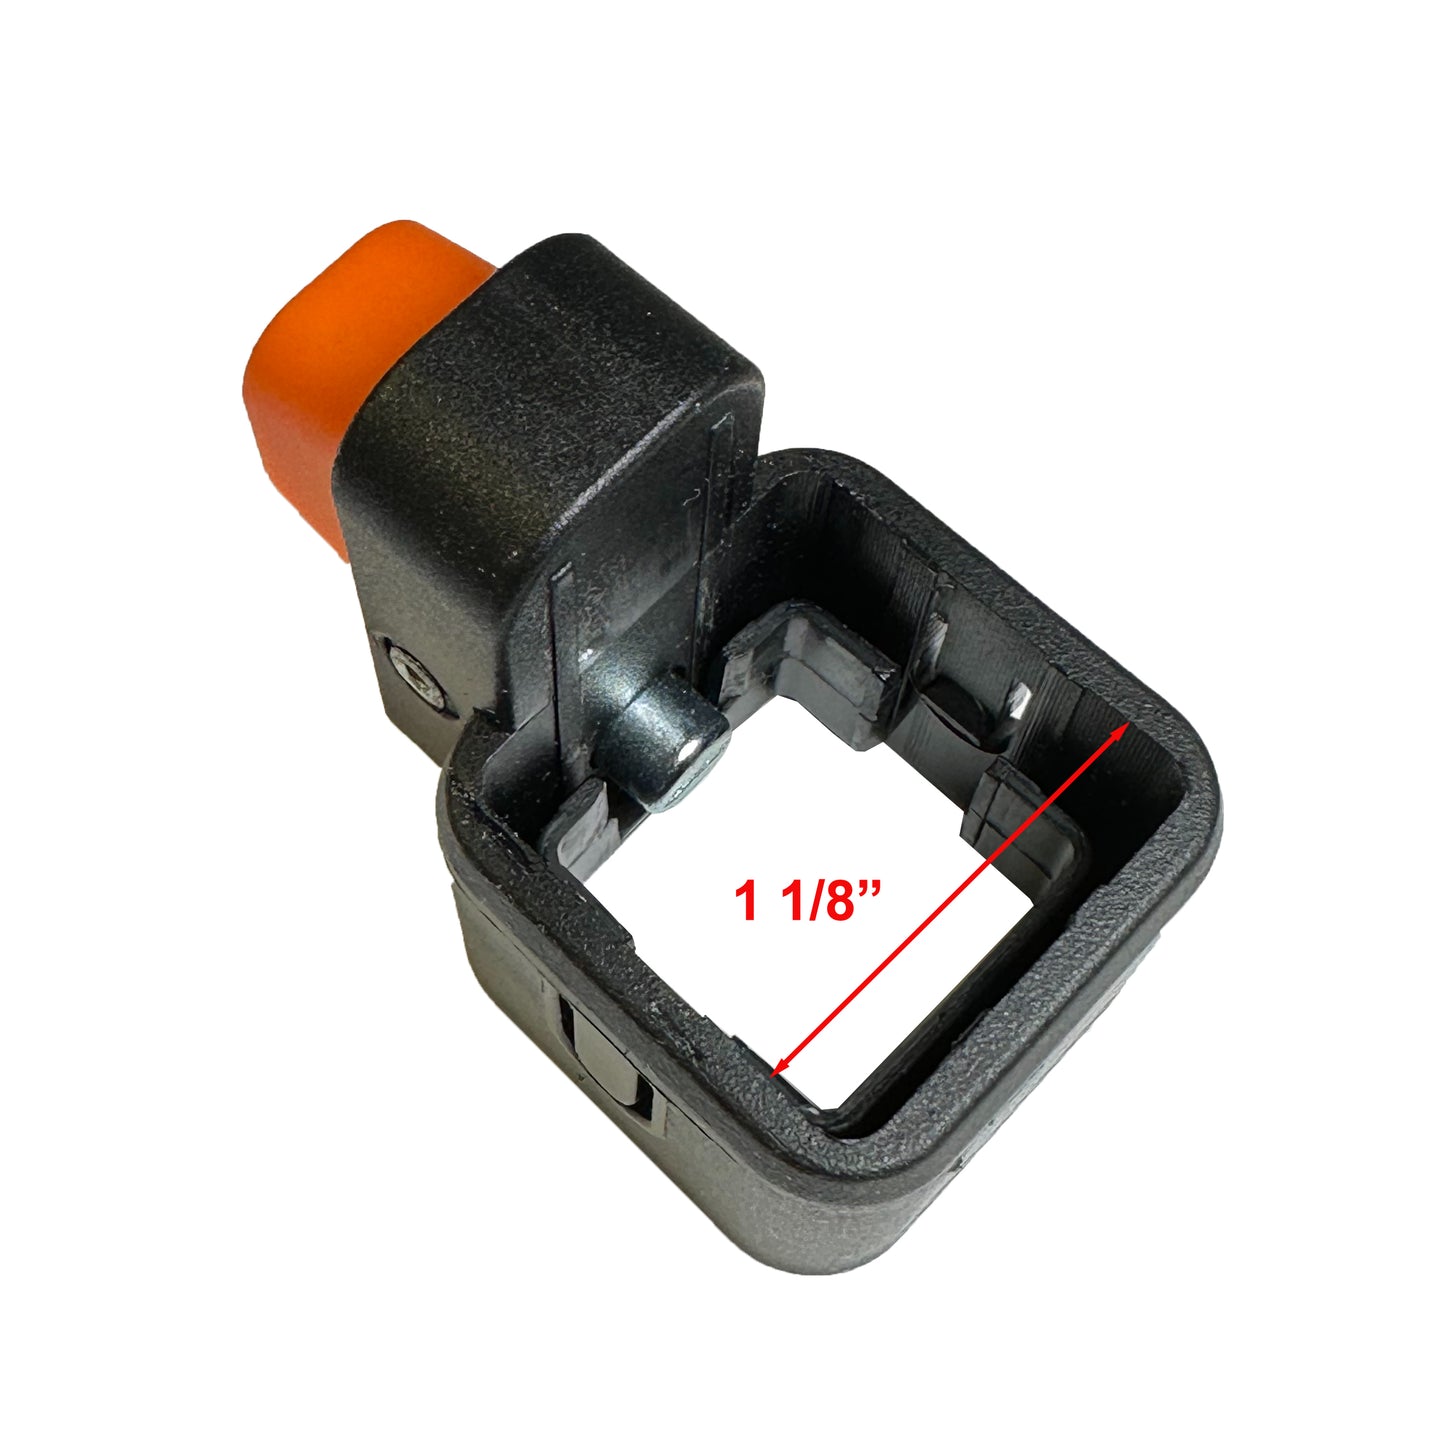 "Top-down view of a black leg lower slider with an orange release button for an Ozark Trail canopy, with the interior width dimension marked as 1 1/8 inches."